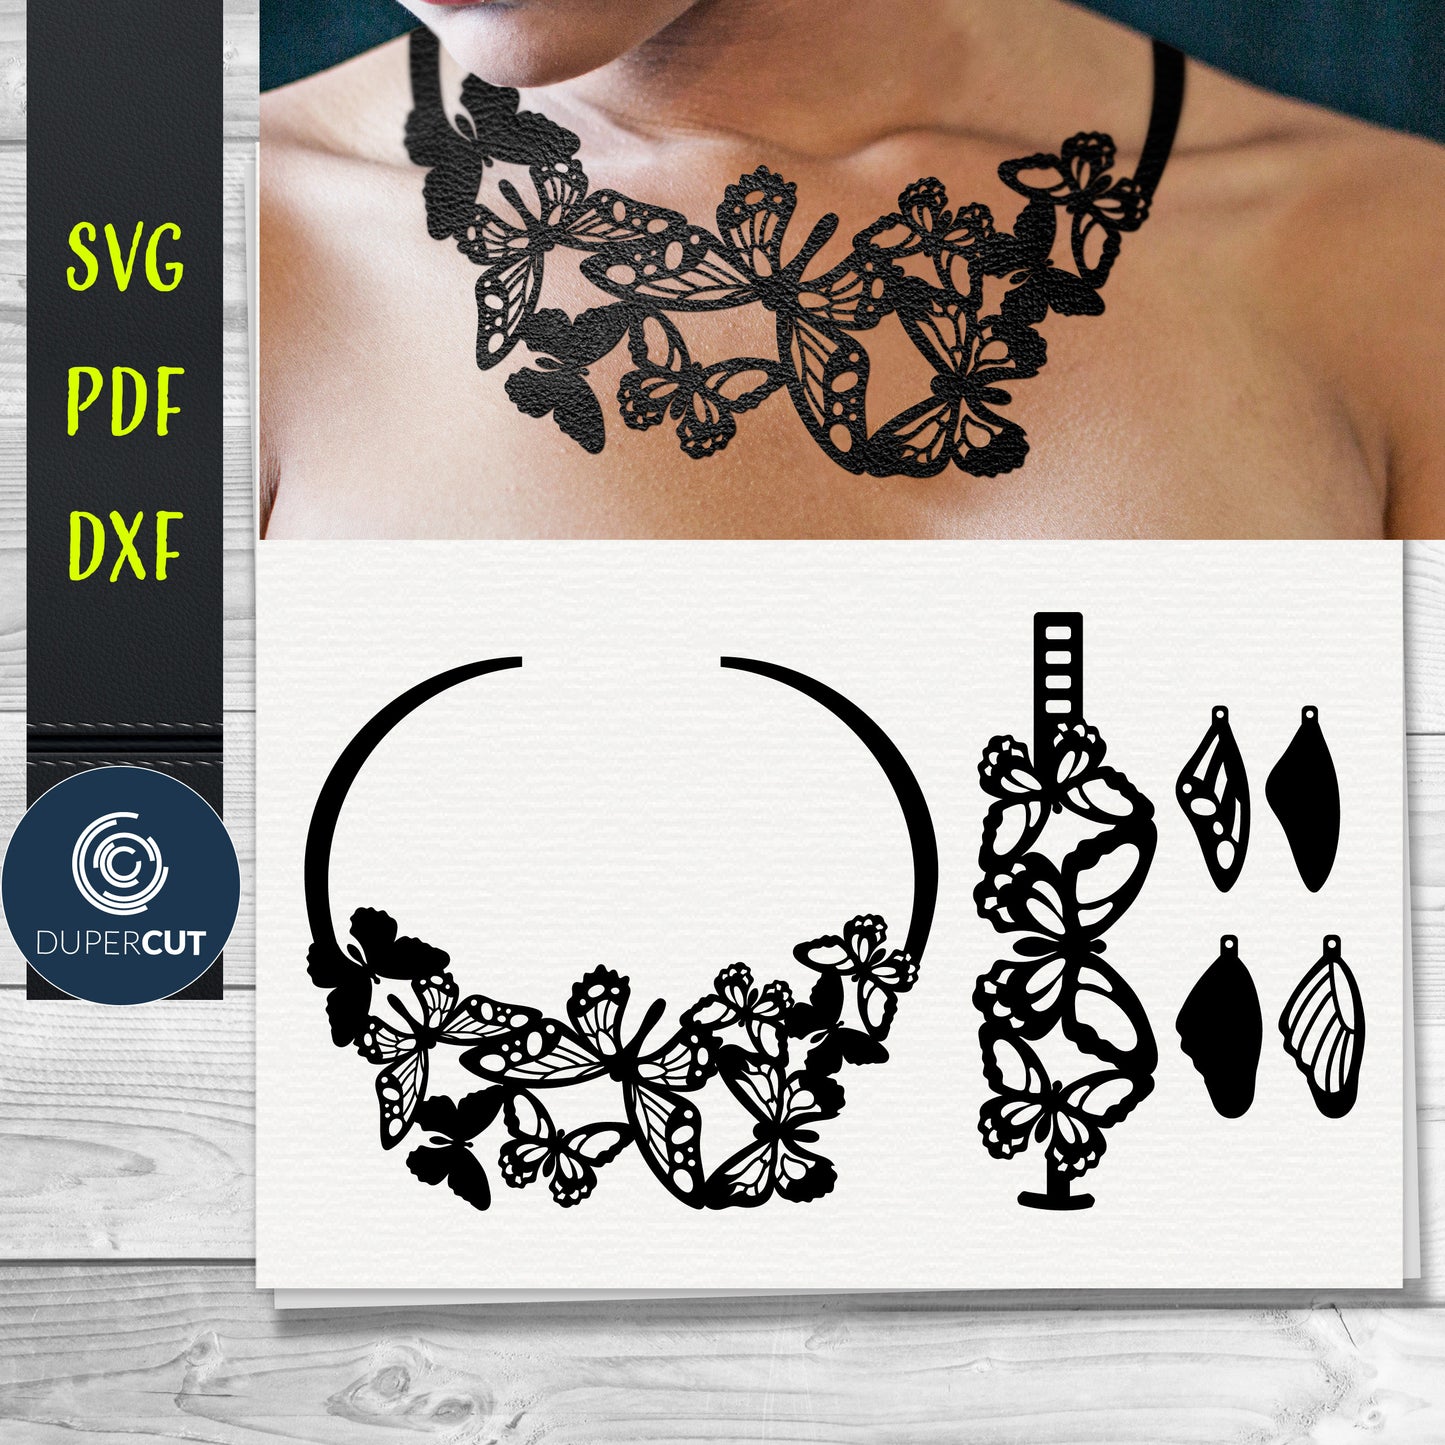 DIY butterflies Leather Bracelet Necklace Set SVG PDF DXF vector files. Jewellery making template for laser and cutting machines - Glowforge, Cricut, Silhouette Cameo.